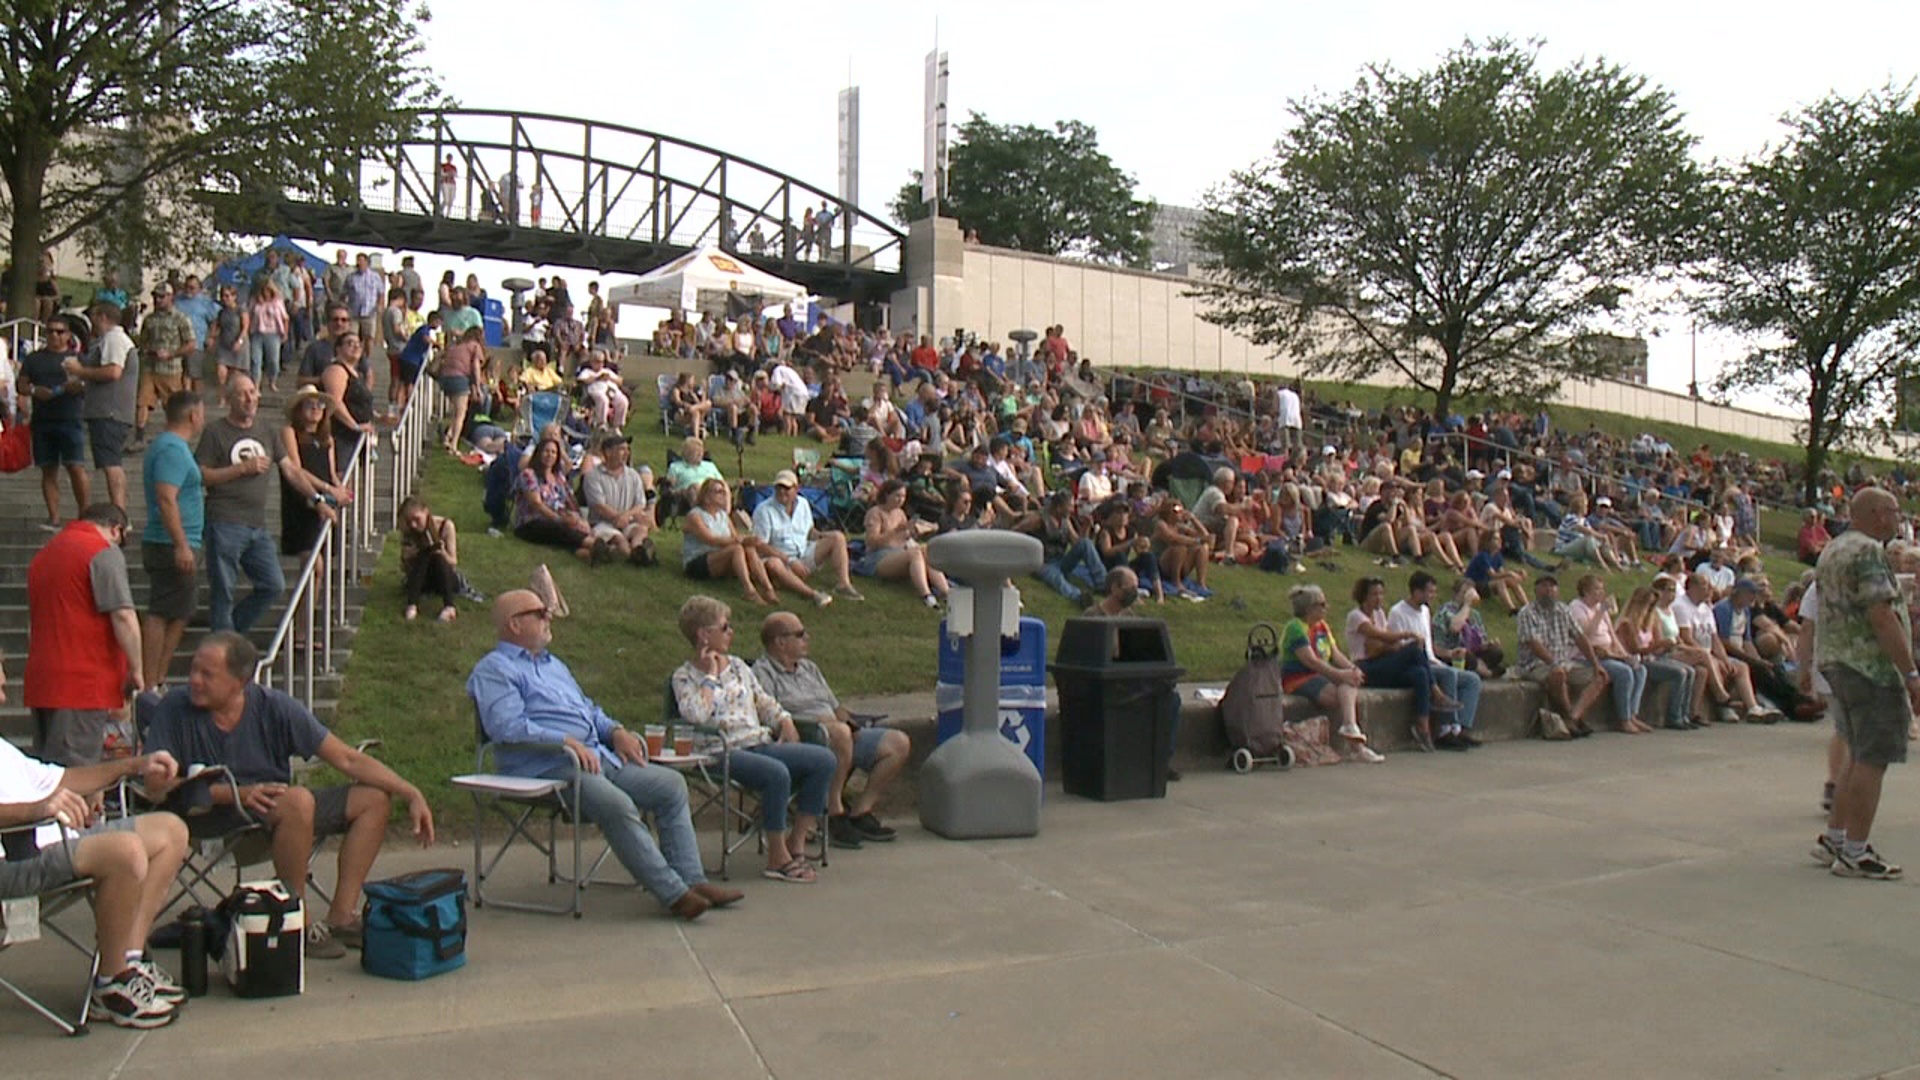 The lineup for this summer's Rockin' the River concerts was announced Thursday in Luzerne County.